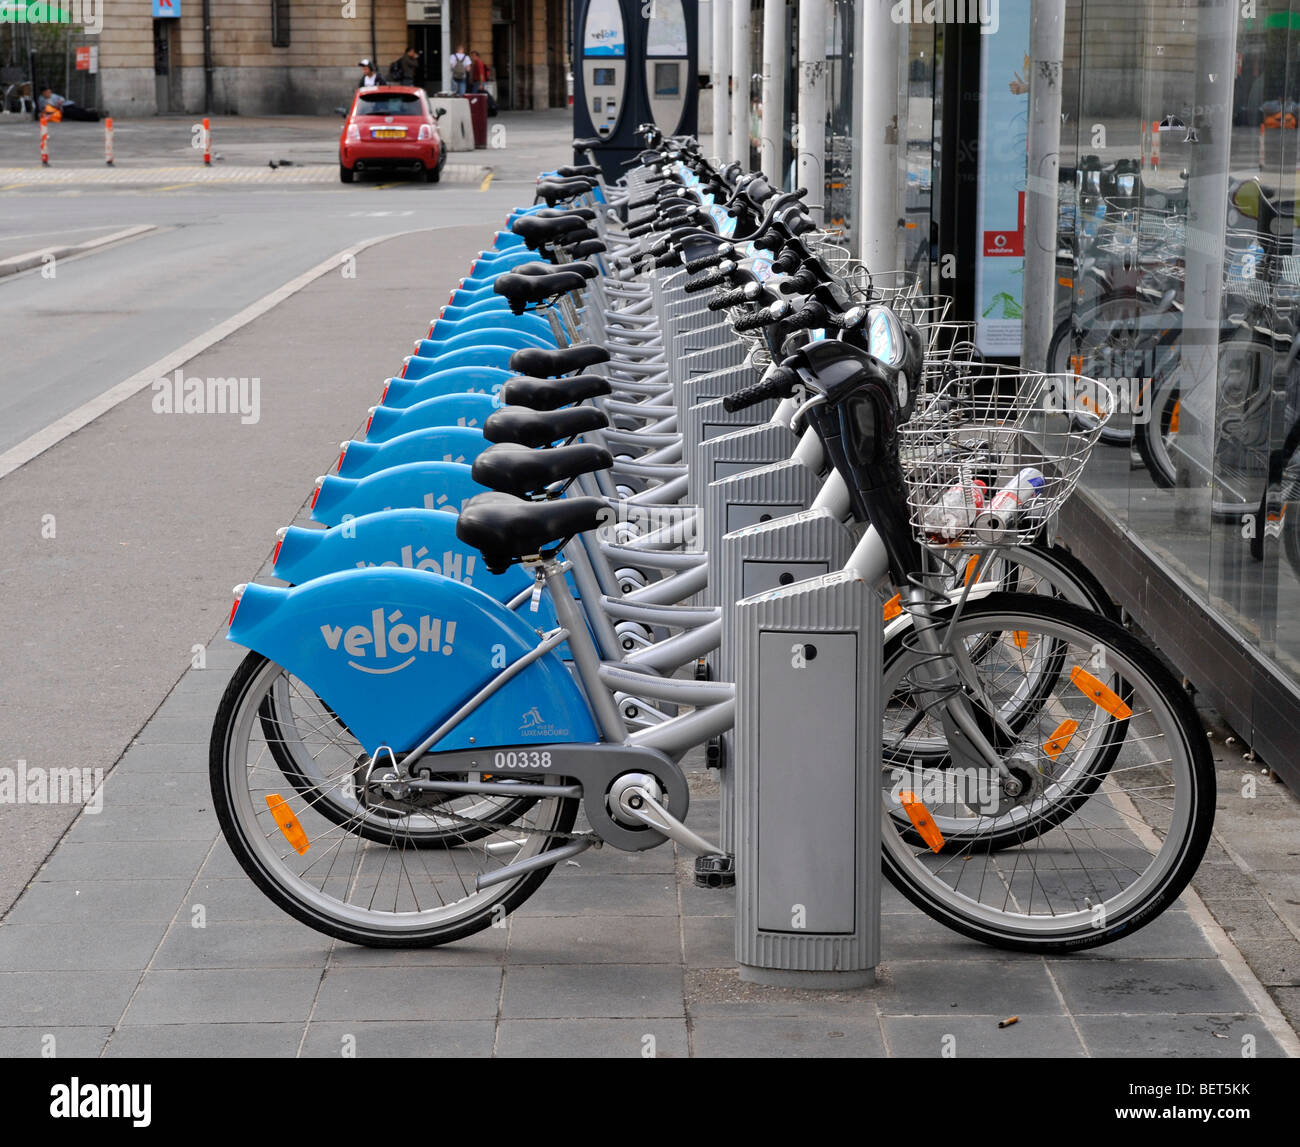 Pedal cycles for hire, City Centre, Luxembourg. Stock Photo